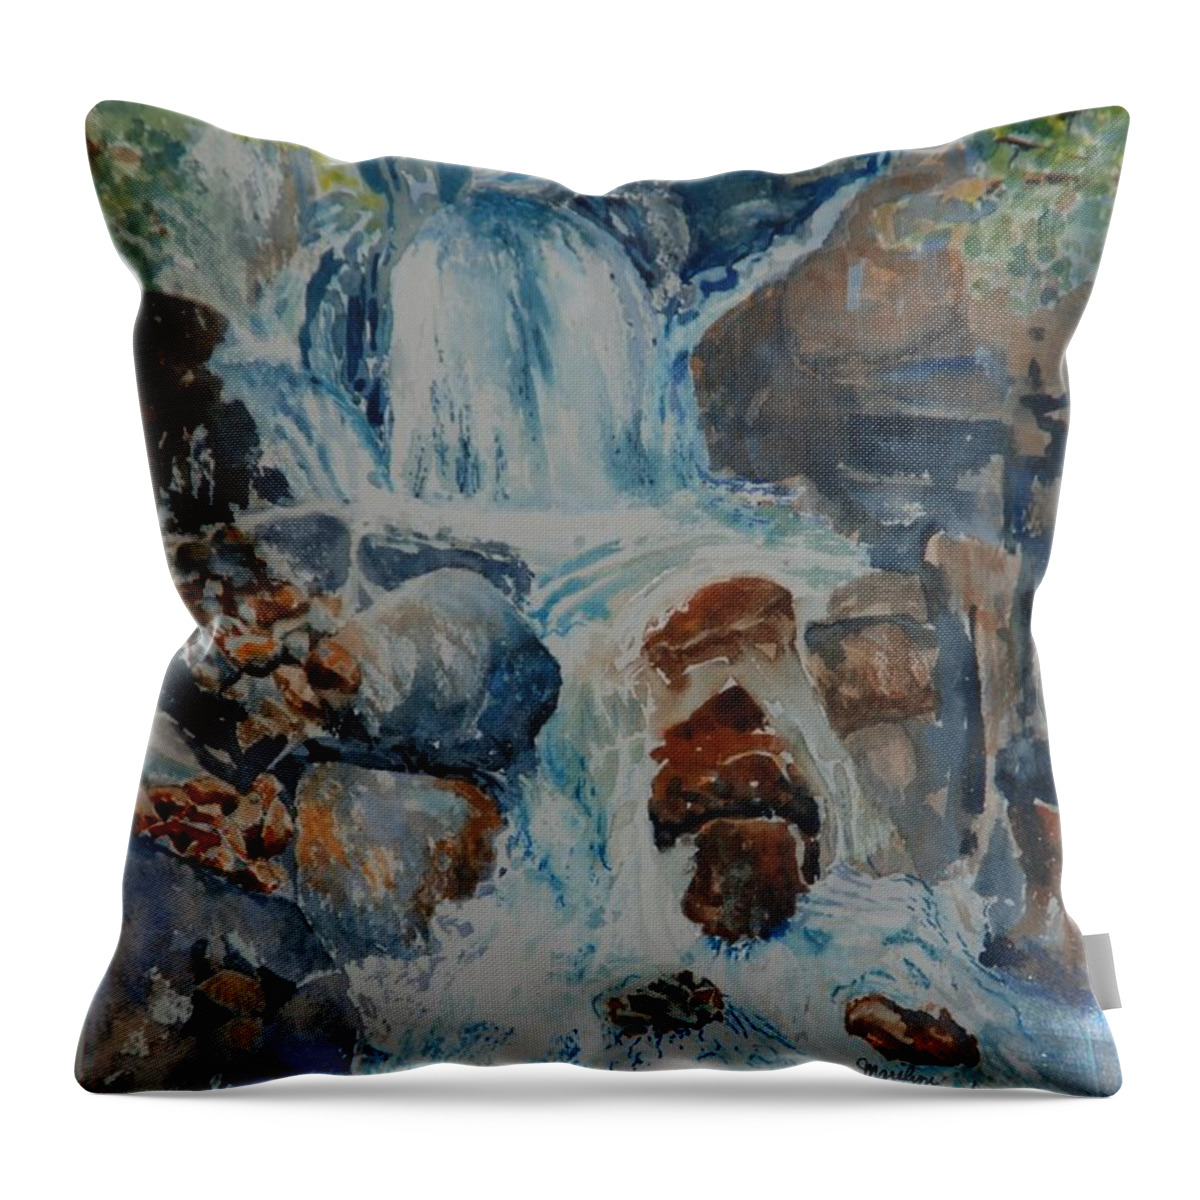 Waterfalls Throw Pillow featuring the painting Yosemite Falls by Marilyn Clement